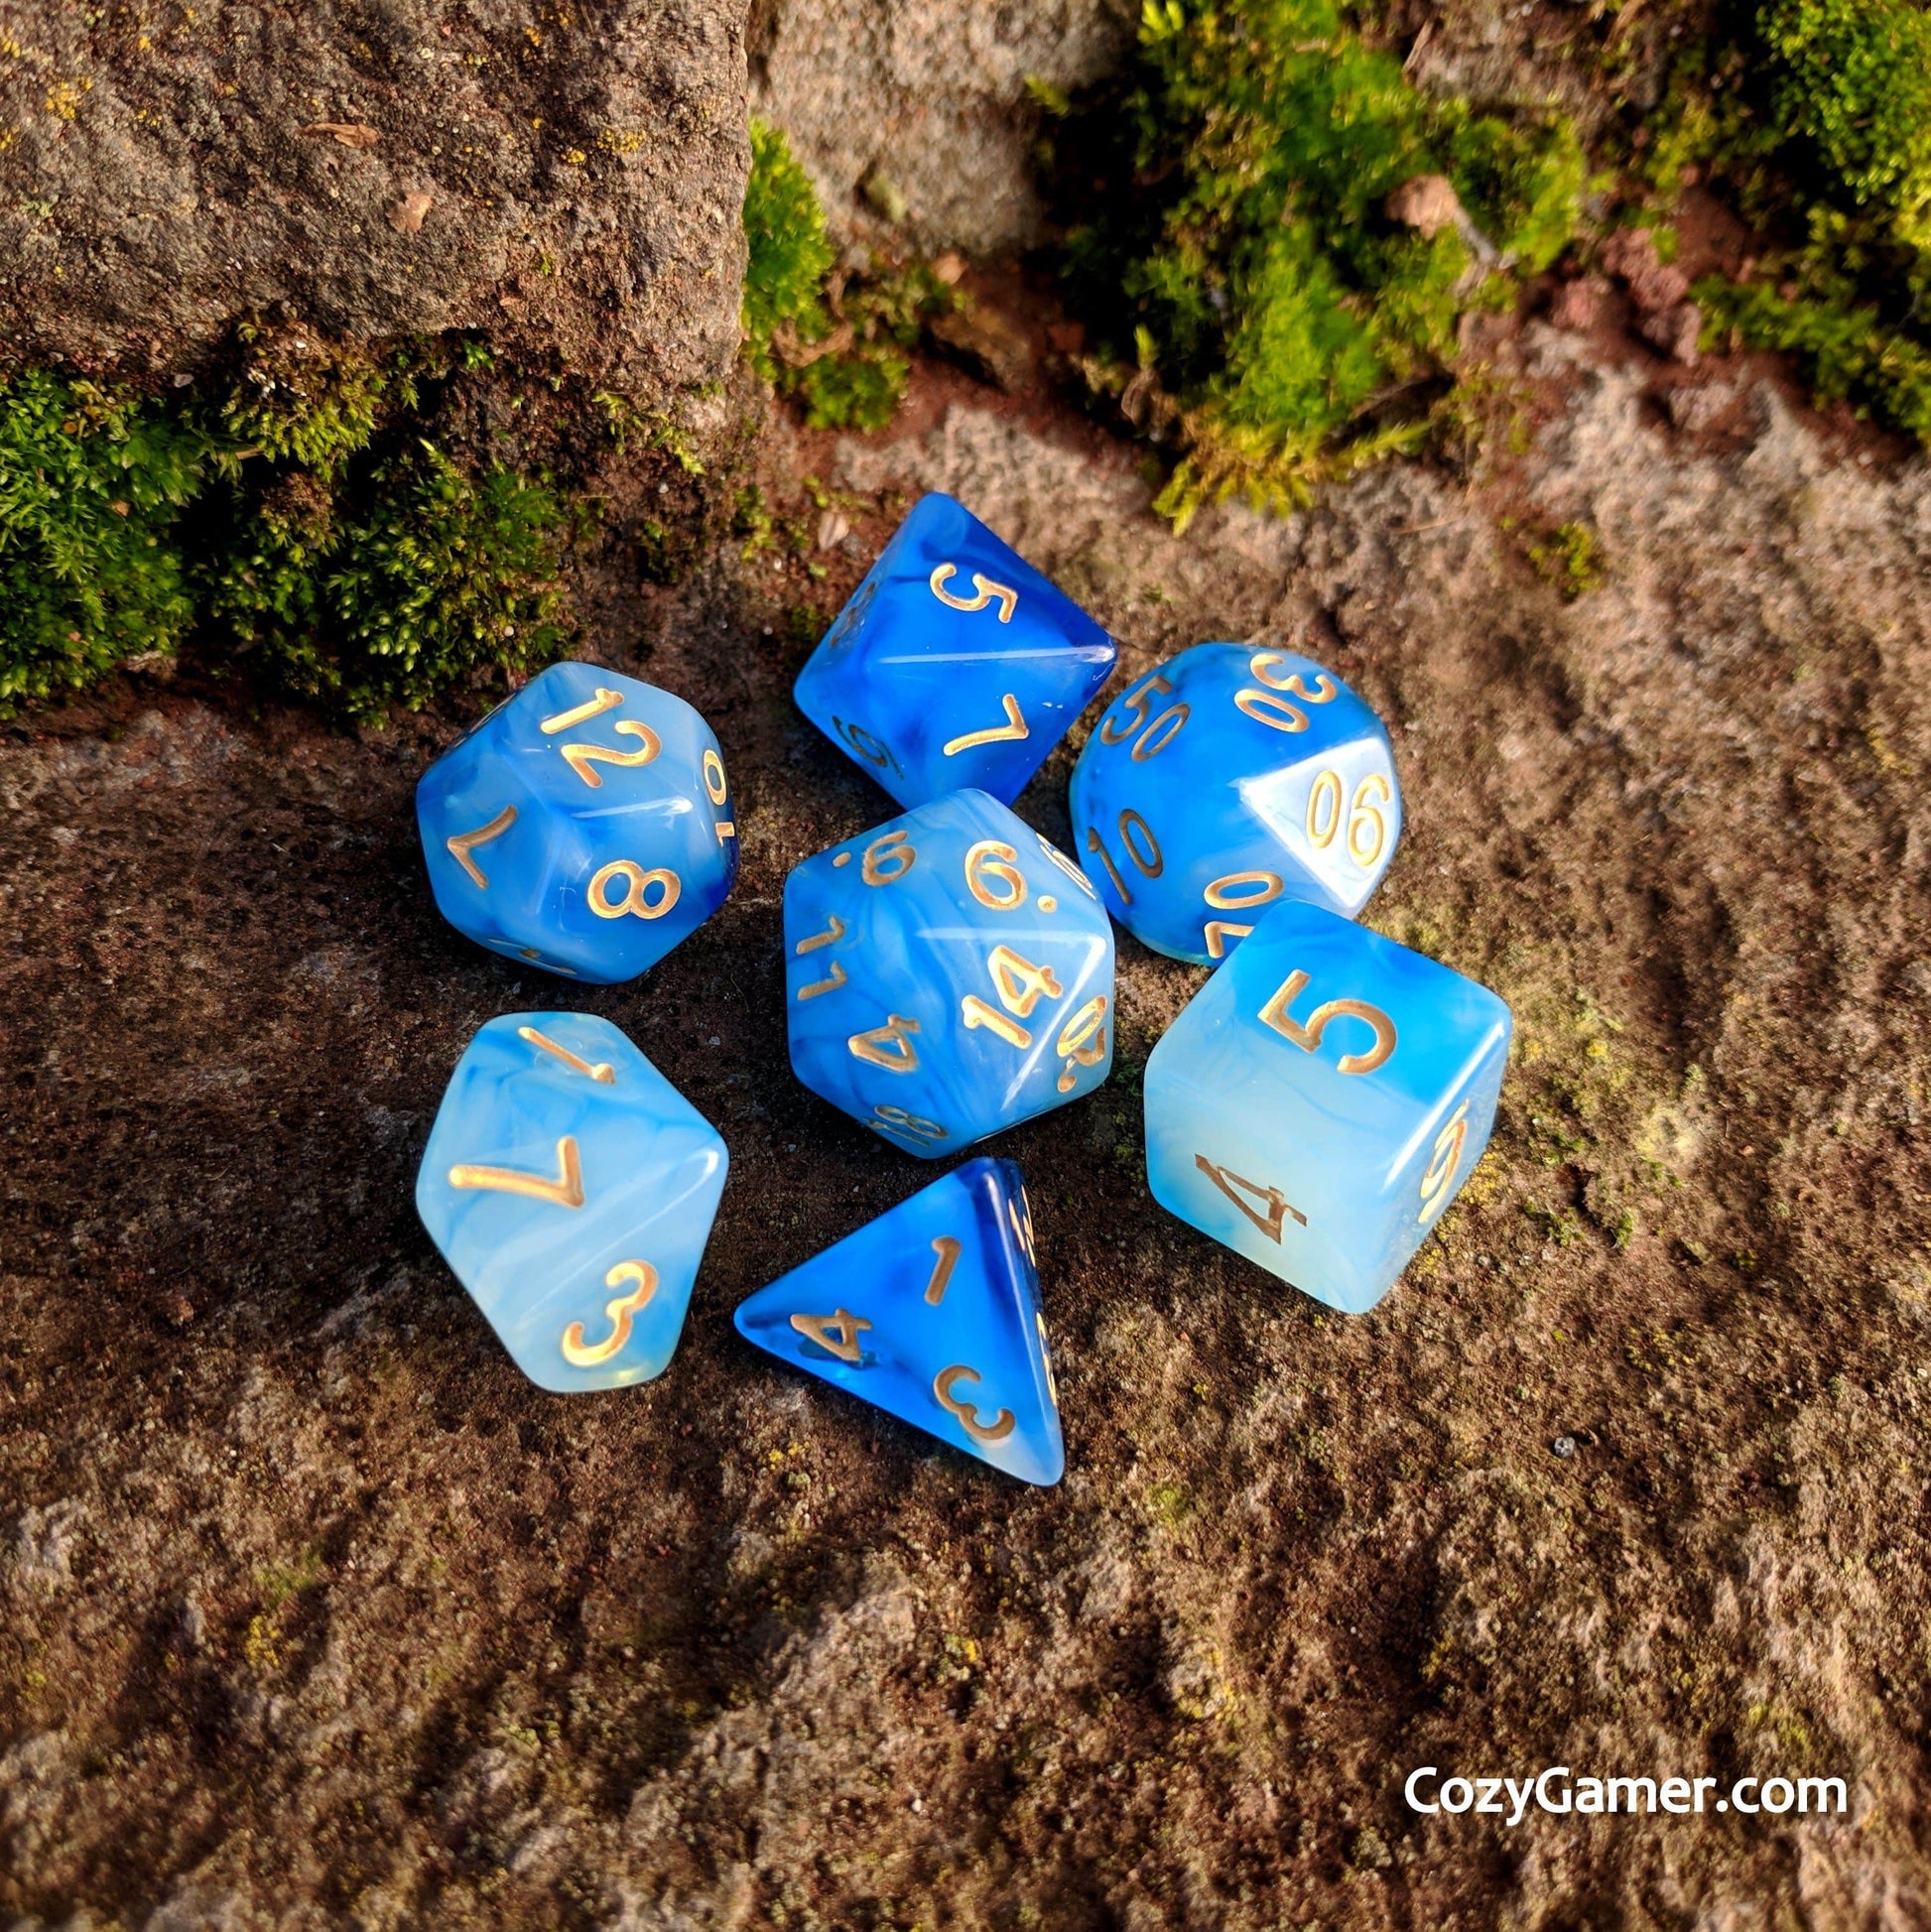 Hypnotic DnD Dice Set, Semi Translucent Cloudy Blue and White Dice - CozyGamer